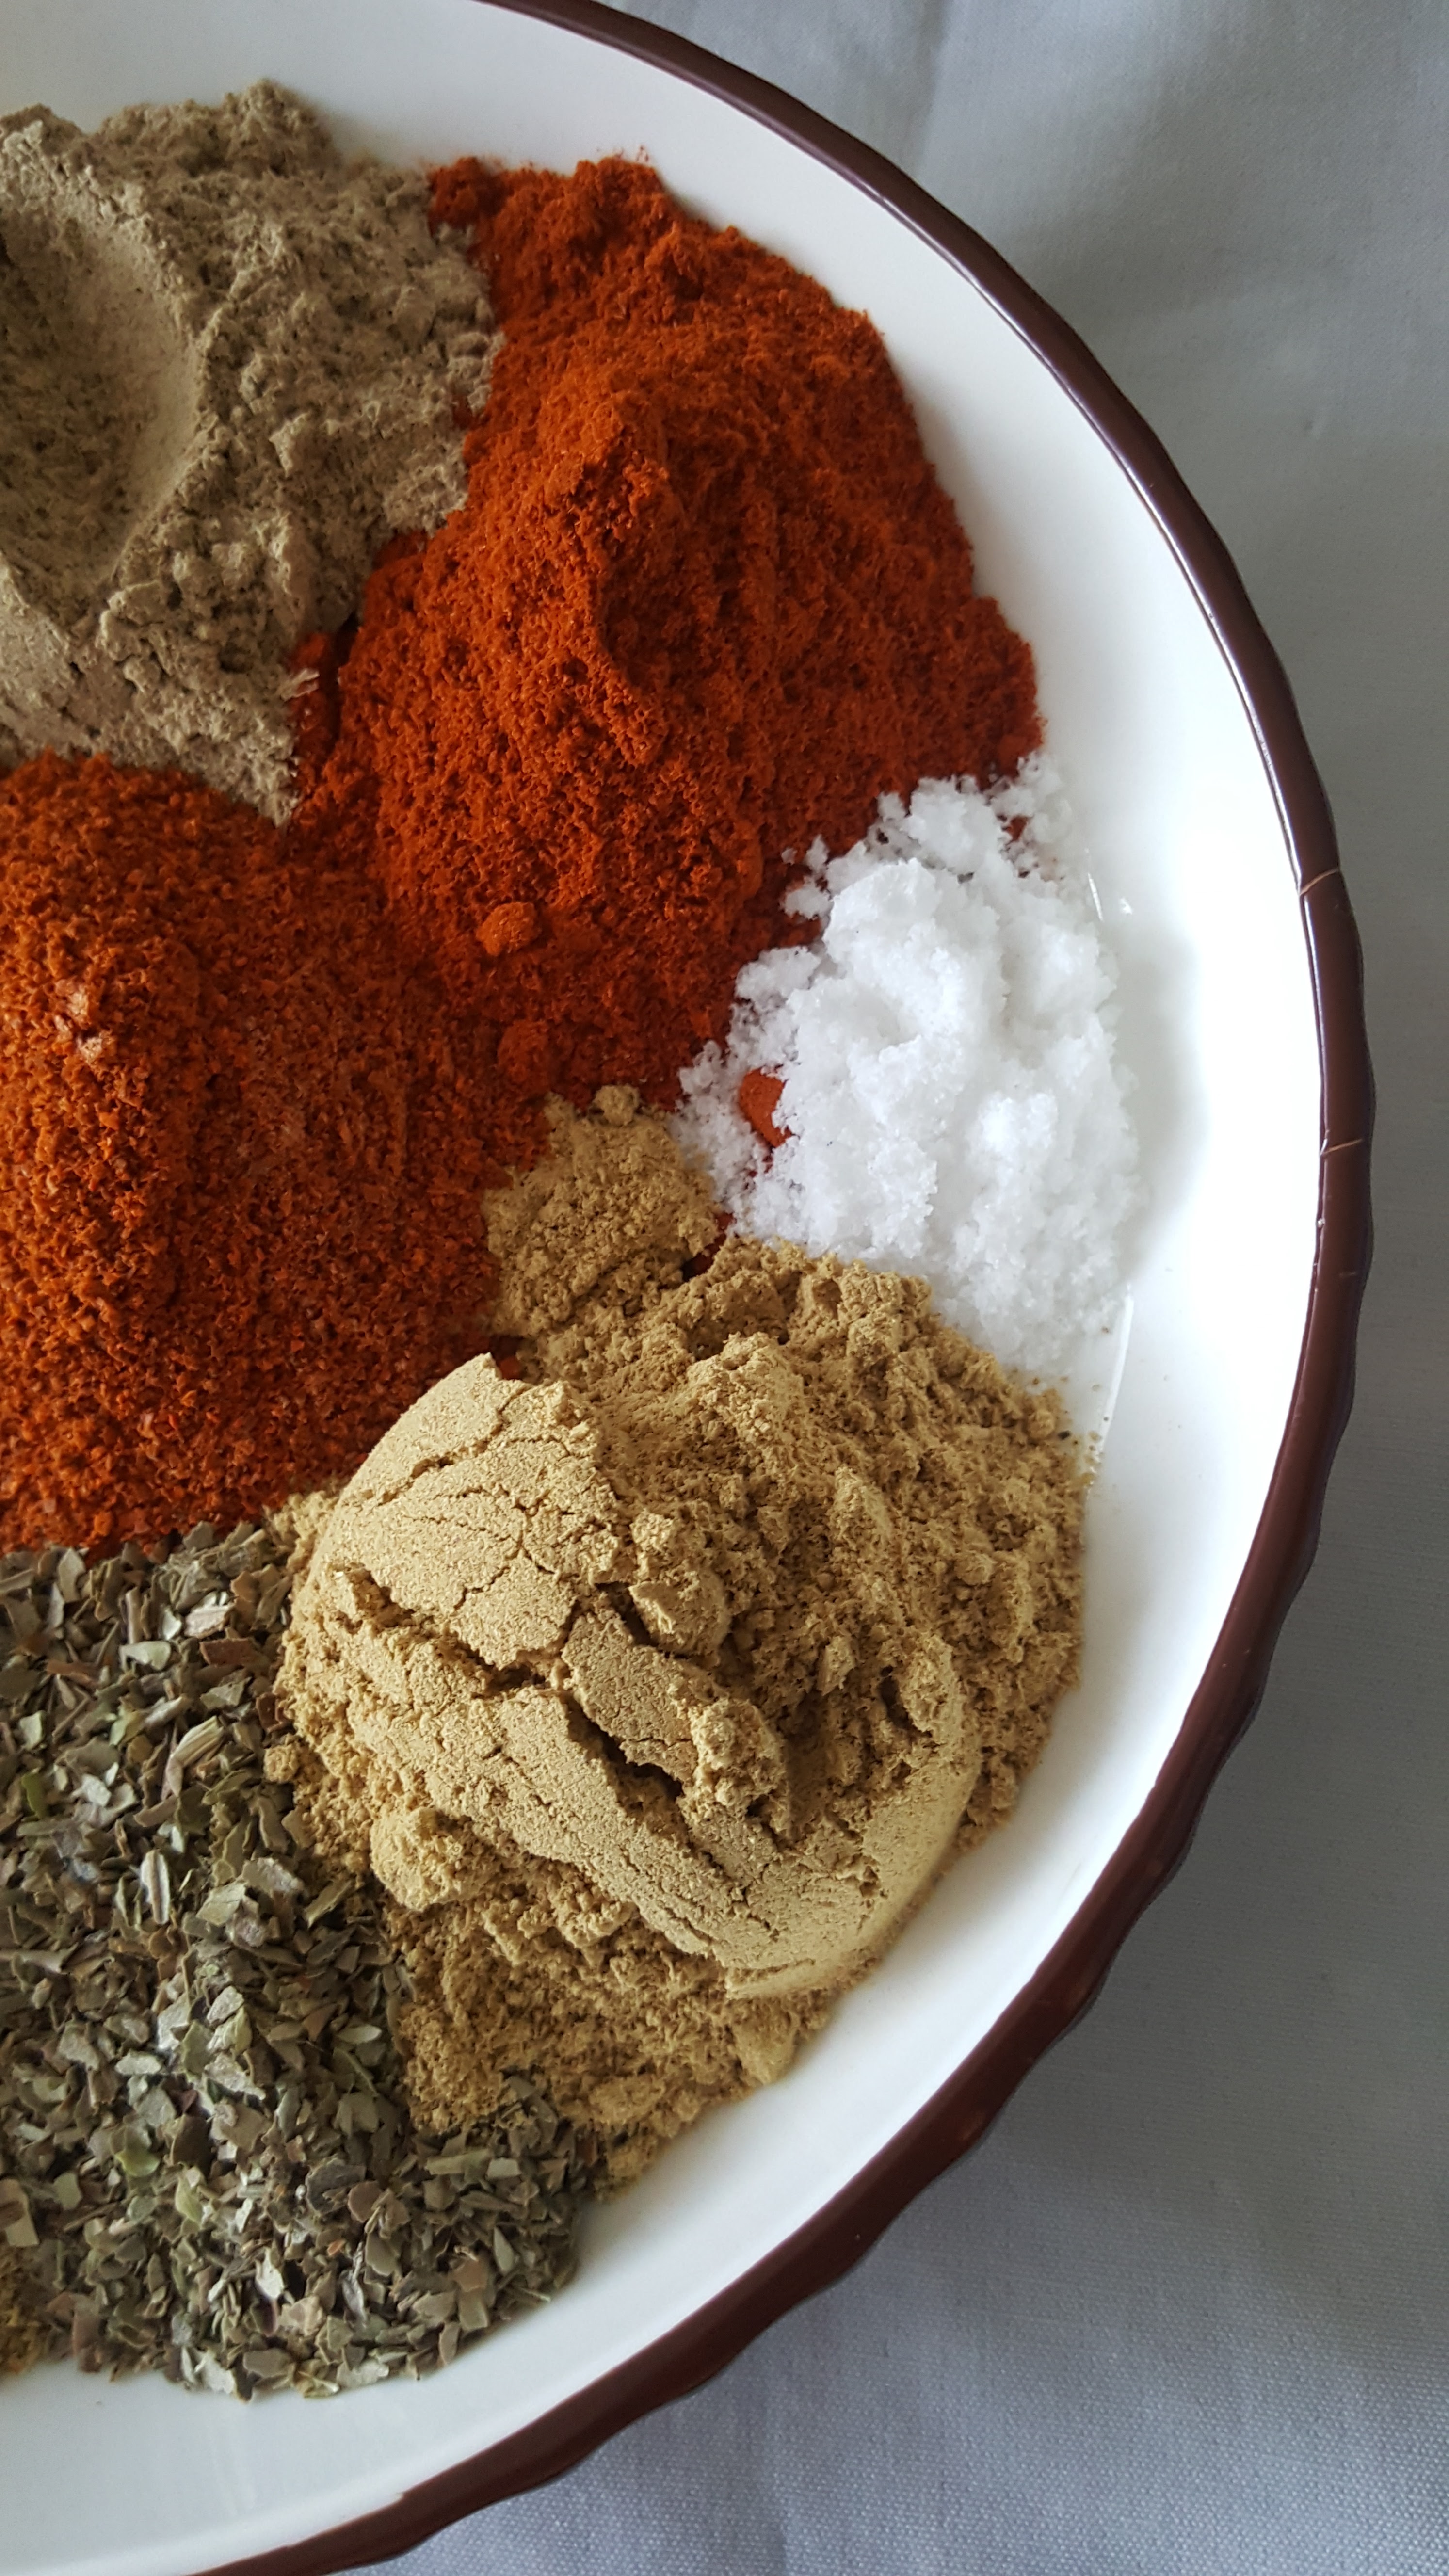 Peri peri seasoning is a blend of spices used to flavor chicken or other meats and may be used in any other dish. nairobi kitchen, nairobi kitchen recipes, nairobi kitchen spice blend